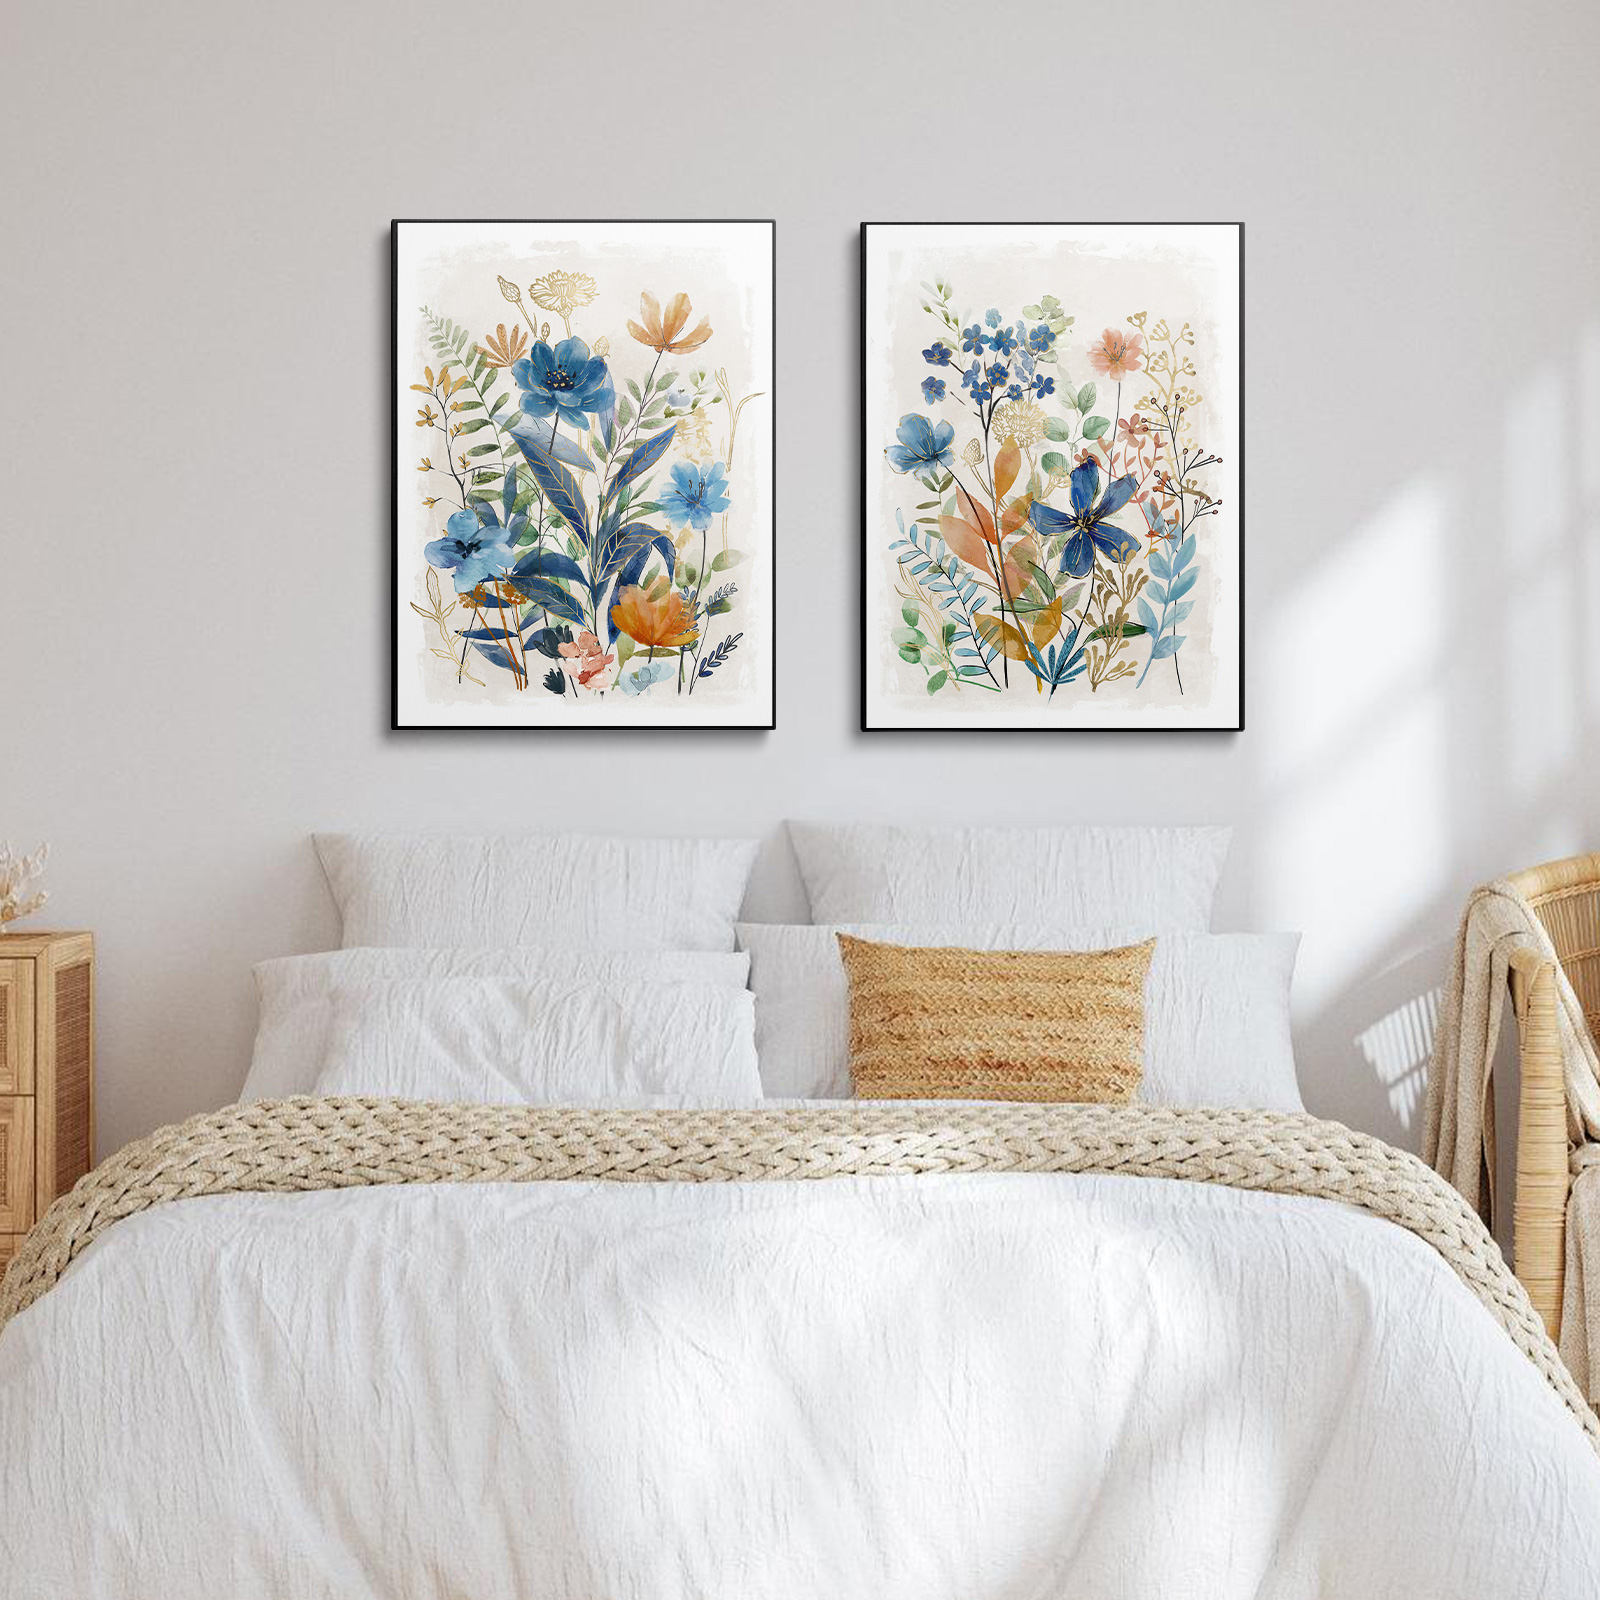 Blooming Bluebonnets and Weeds Framed On Canvas 2-Piece - Lava Odoro-LAVA ODORO